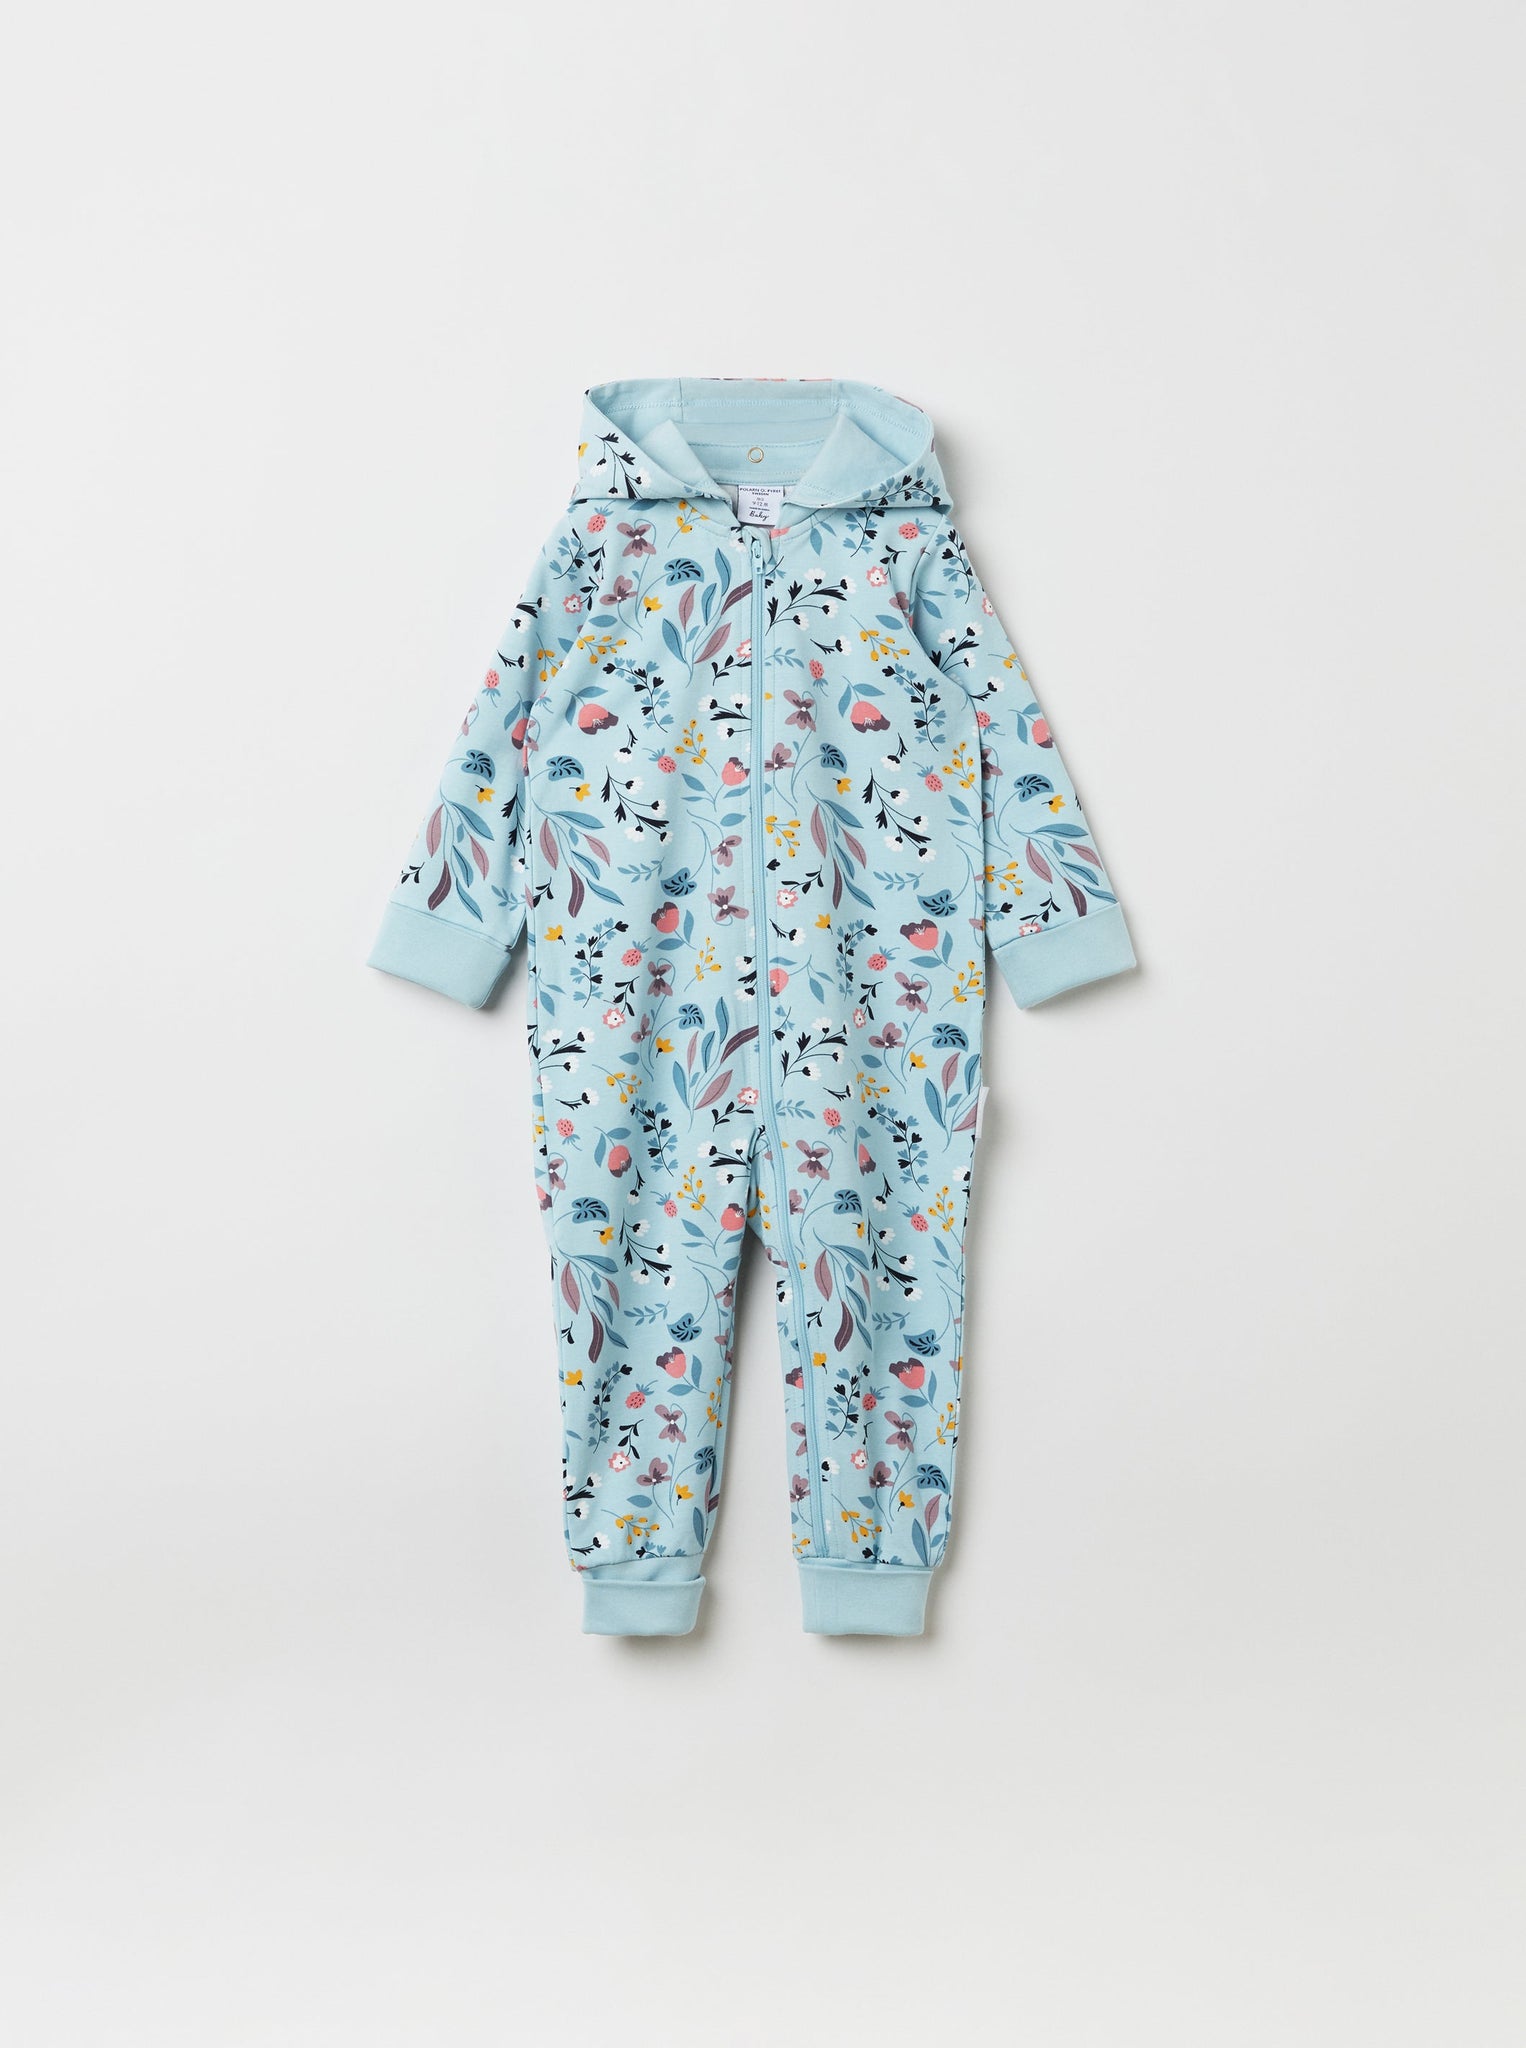 Organic Cotton Floral Baby All-In-One from the Polarn O. Pyret babywear collection. The best ethical kids clothes